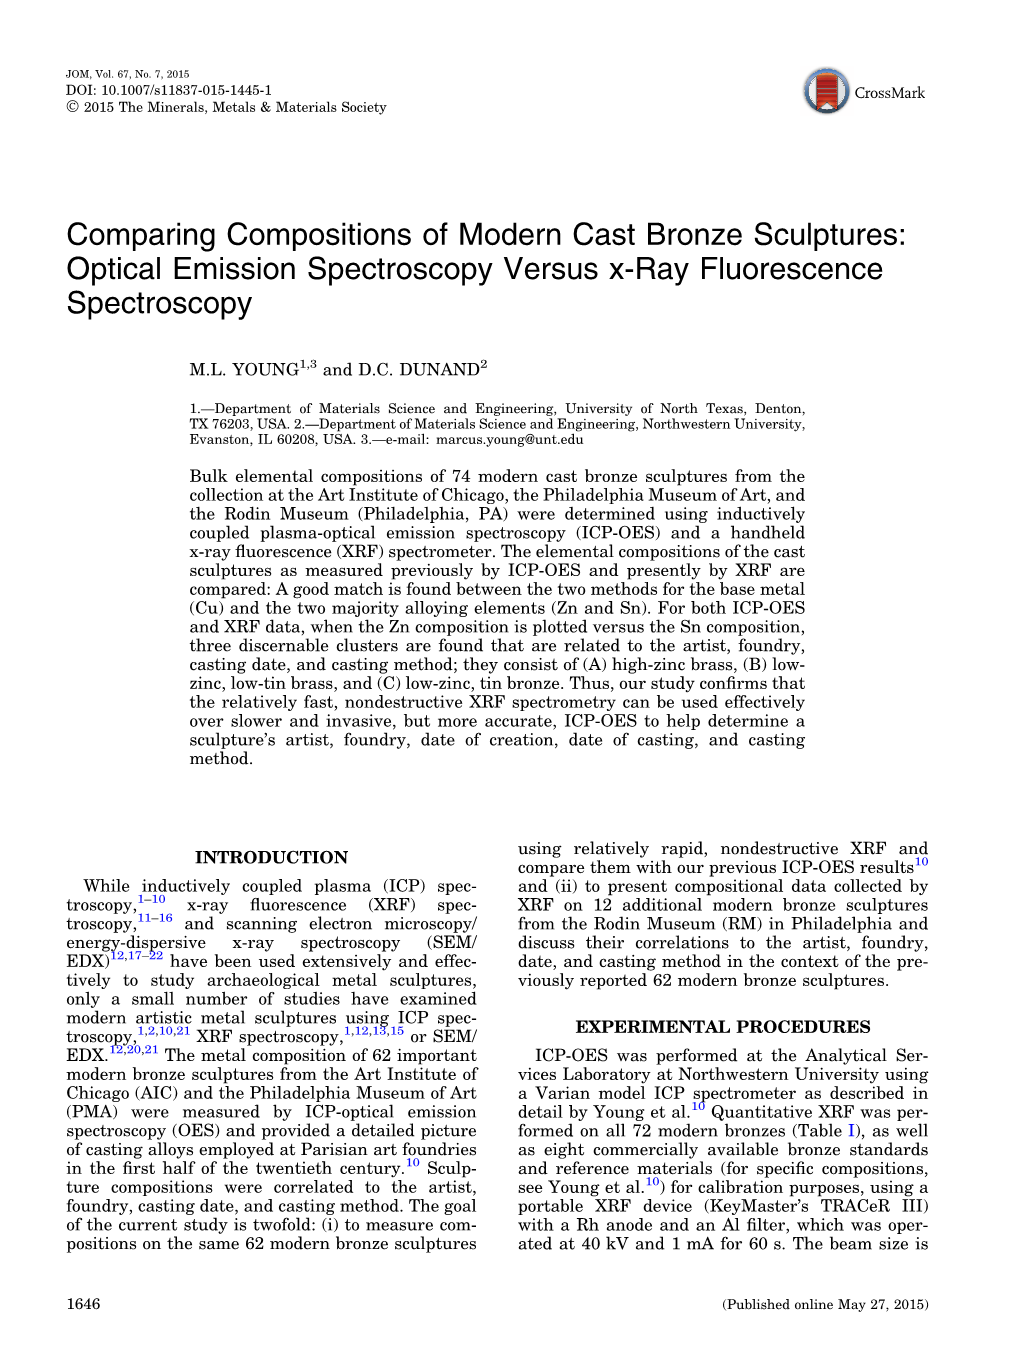 Comparing Compositions of Modern Cast Bronze Sculptures: Optical Emission Spectroscopy Versus X-Ray Fluorescence Spectroscopy